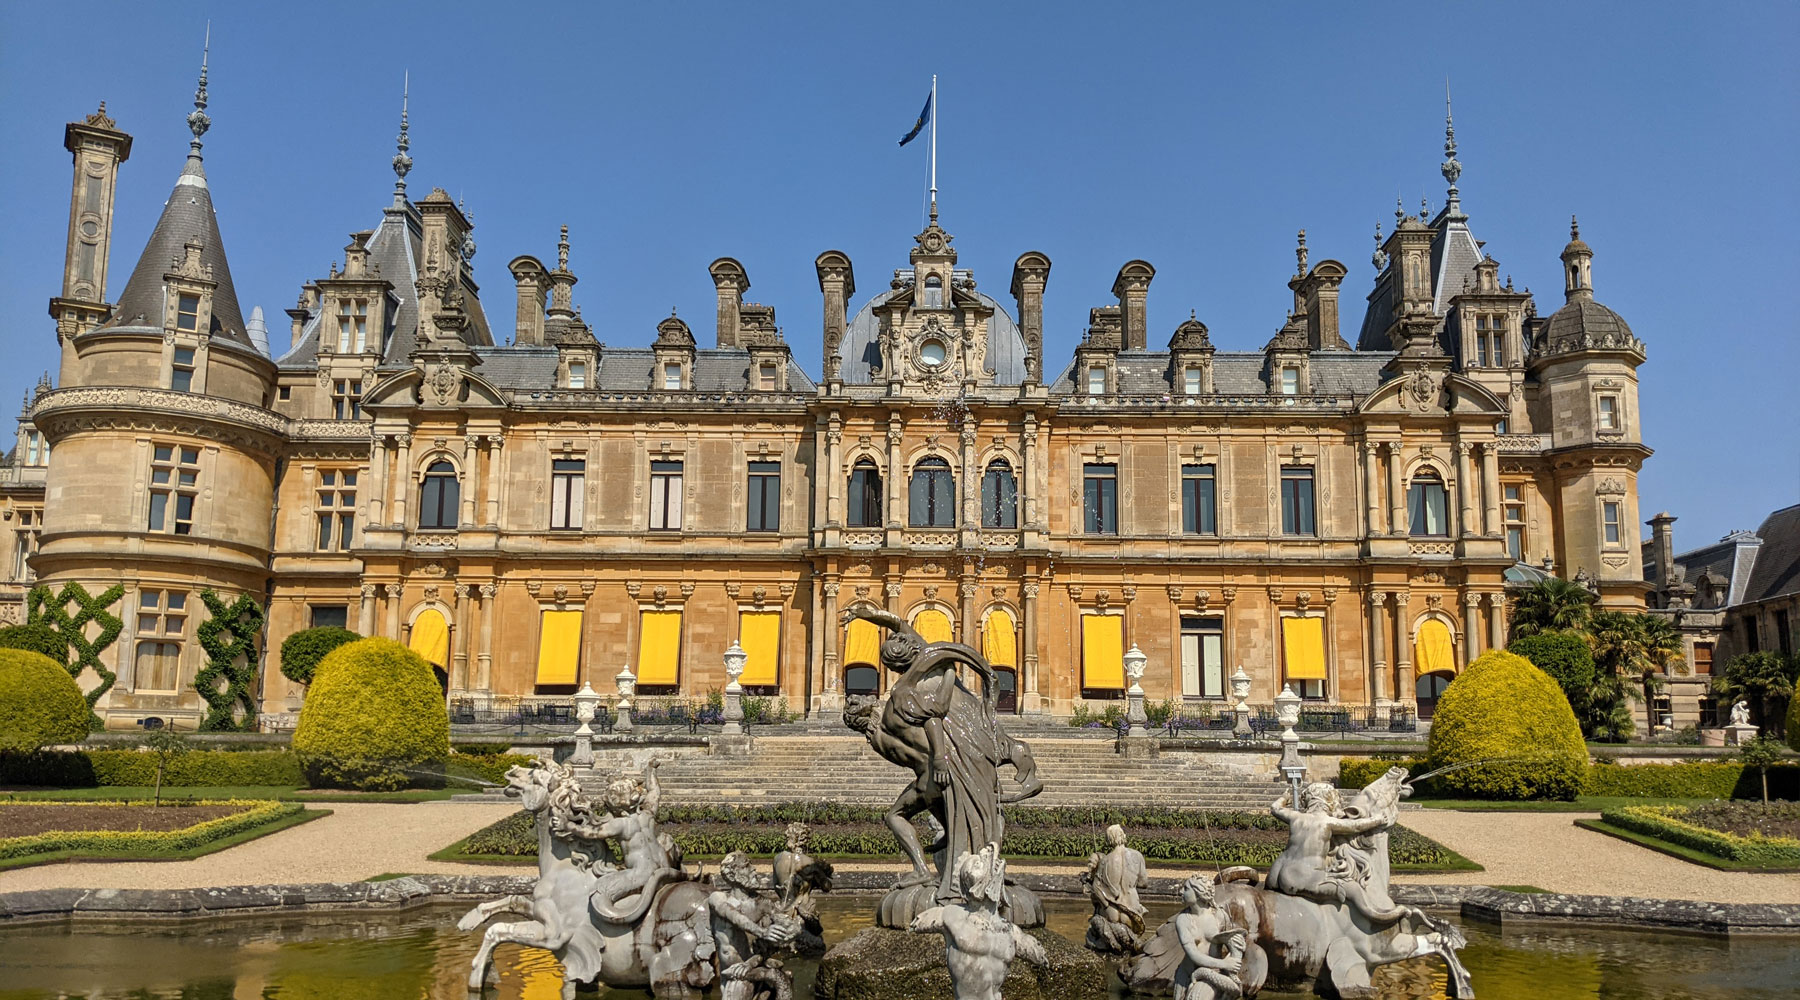 A day trip to - Waddesdon Manor